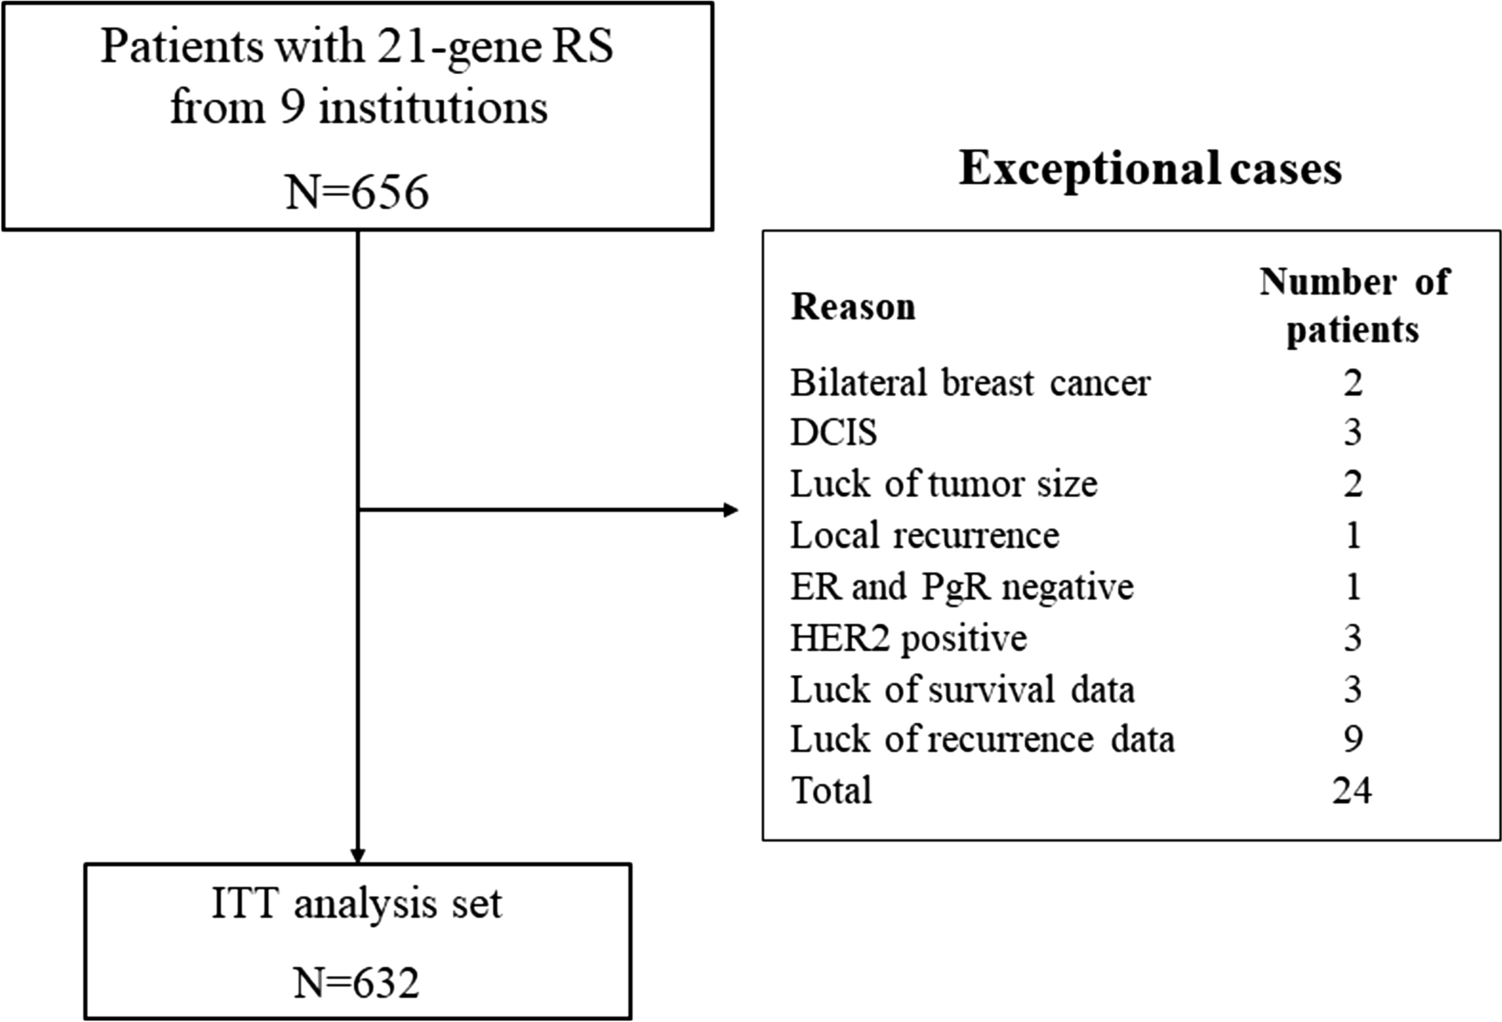 Correlation between postoperative treatment selection and prognosis determined using the Oncotype DX® test data: a retrospective multicenter study in Japan